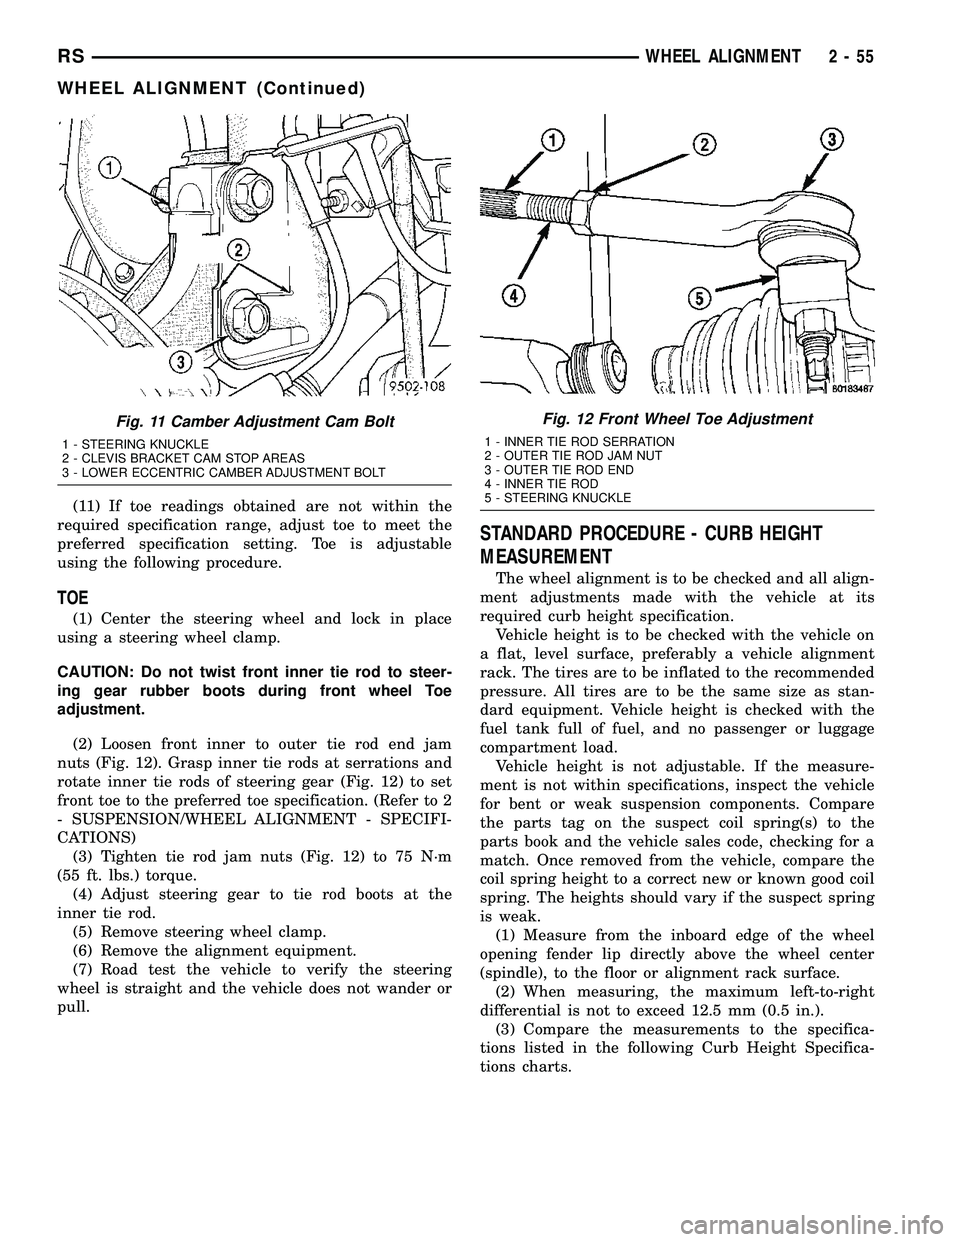 CHRYSLER CARAVAN 2005  Service Manual (11) If toe readings obtained are not within the
required specification range, adjust toe to meet the
preferred specification setting. Toe is adjustable
using the following procedure.
TOE
(1) Center t